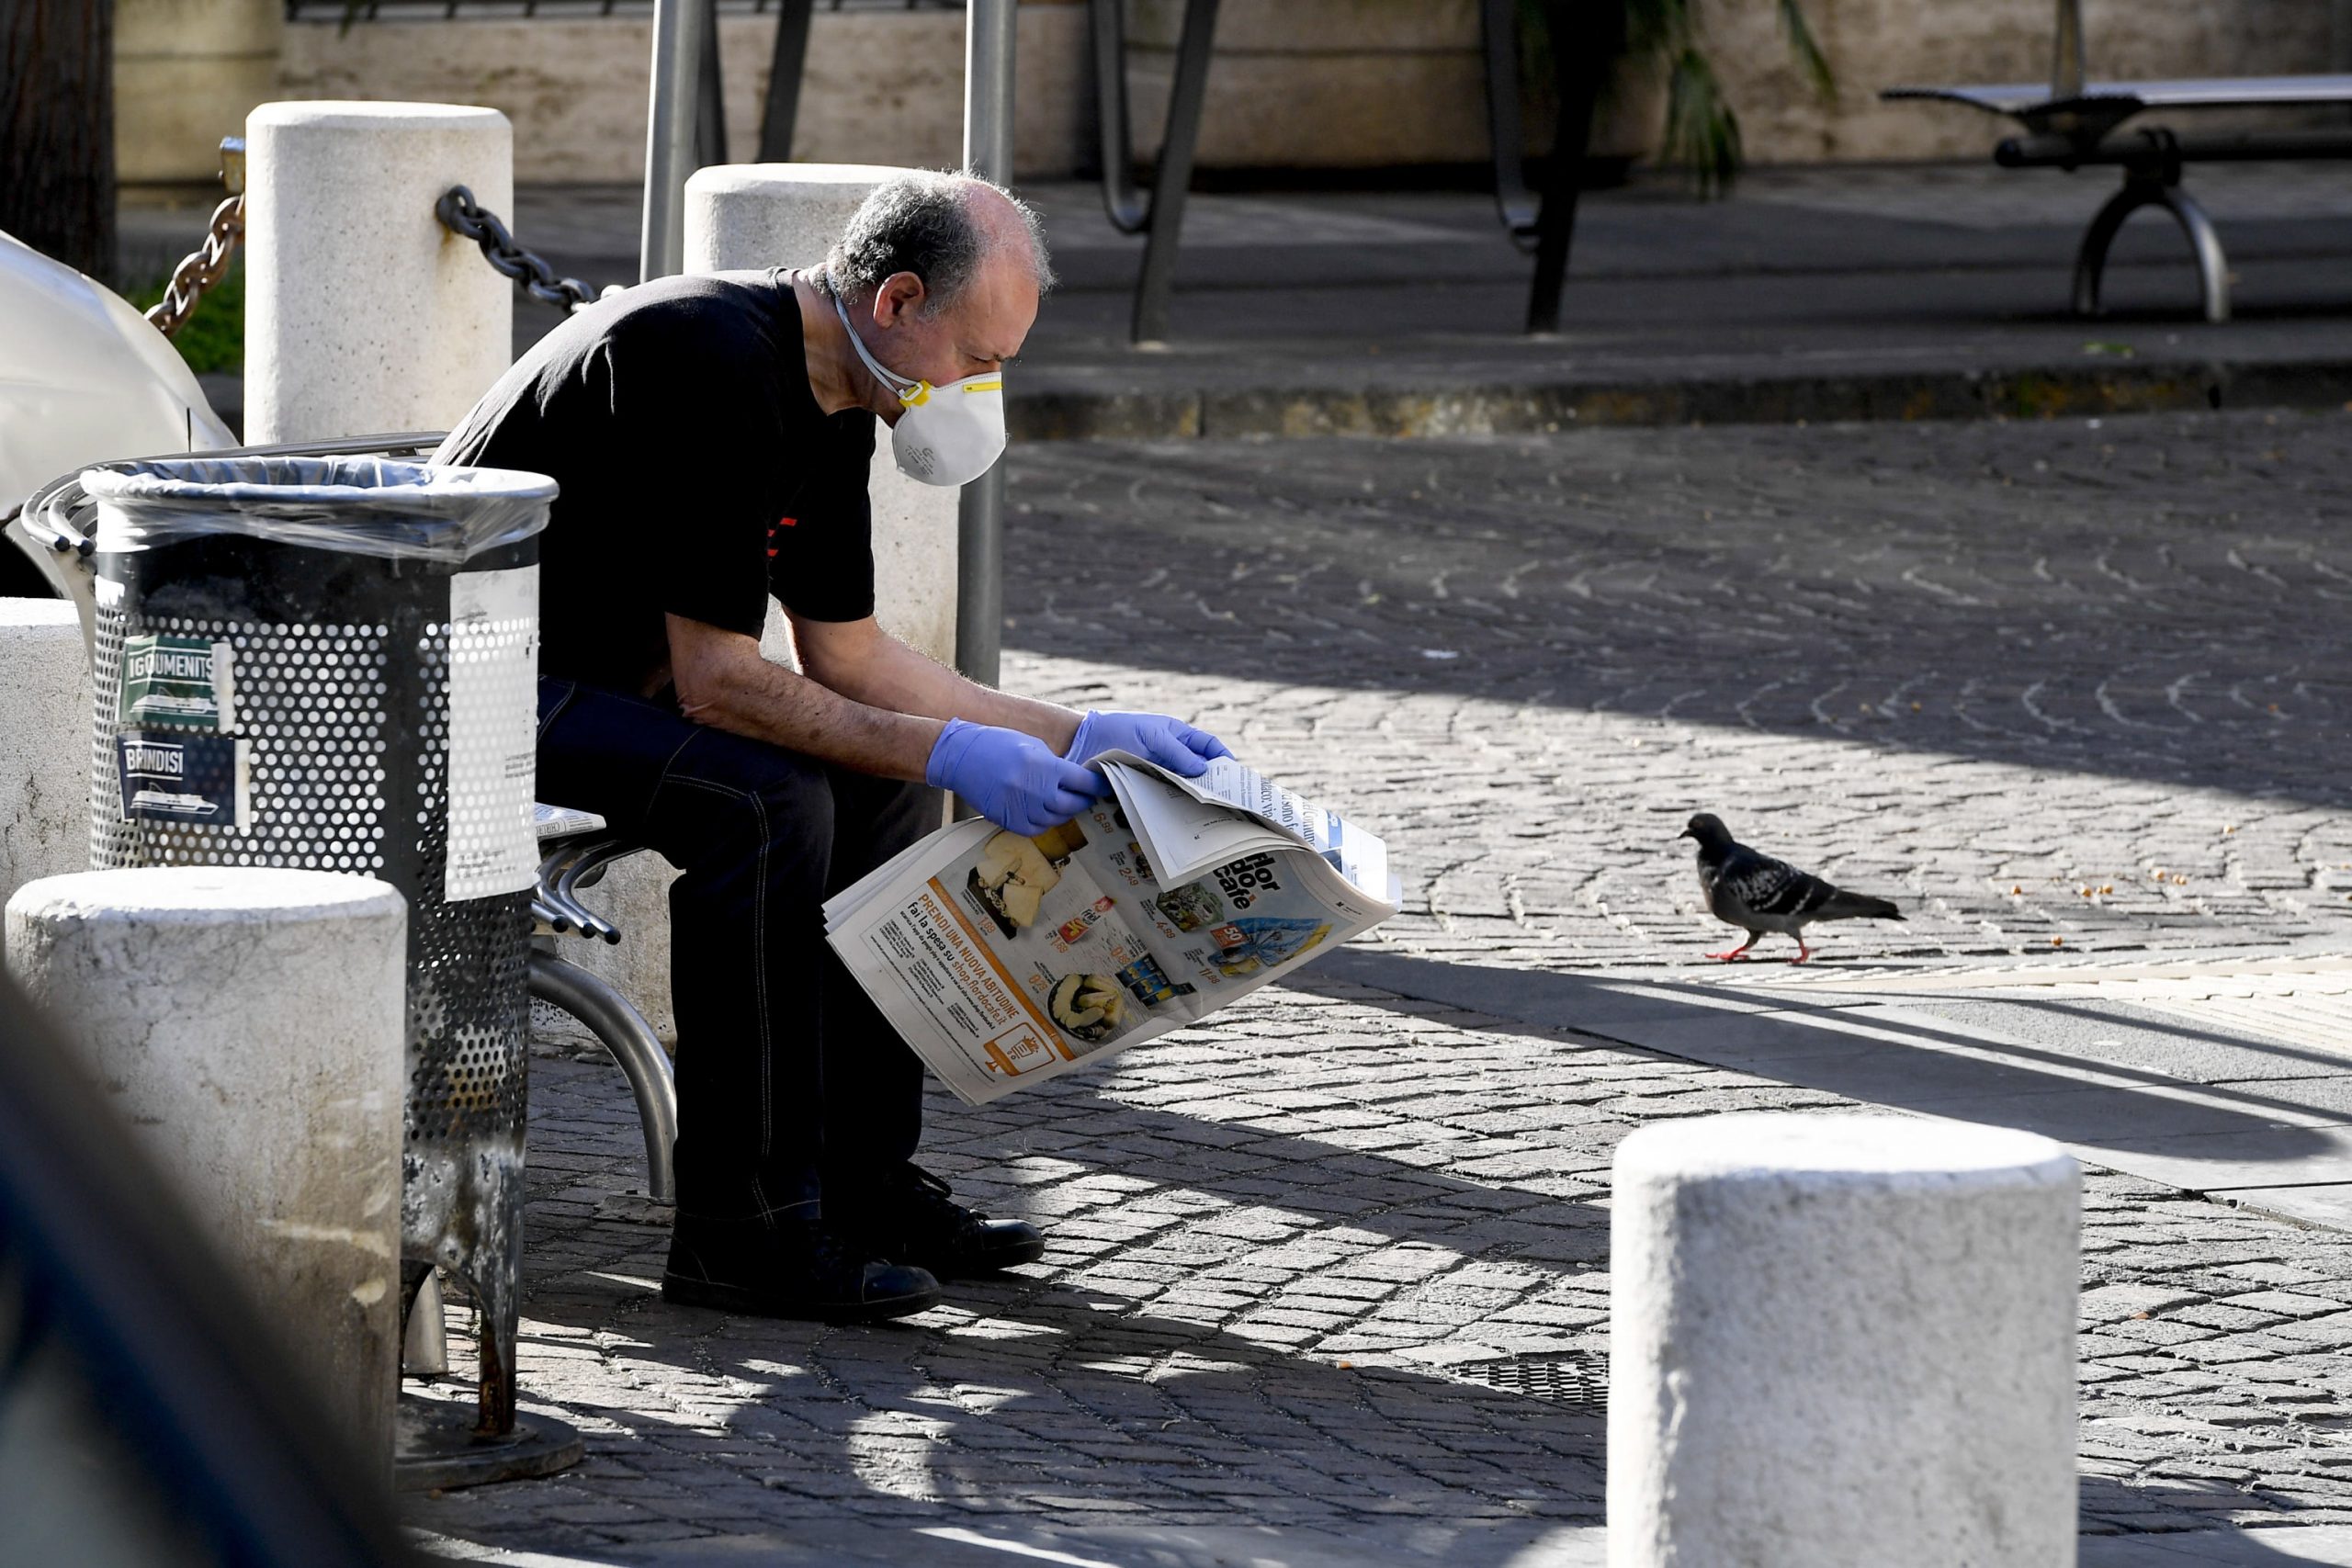 epa08349807 A man protected with a face mask and latex gloves sits on a bench and reads a newspaper in Naples, Italy, 08 April 2020, during the lockdown to stem the spread of the COVID-19 infection, caused by the novel Coronavirus.  EPA/CIRO FUSCO